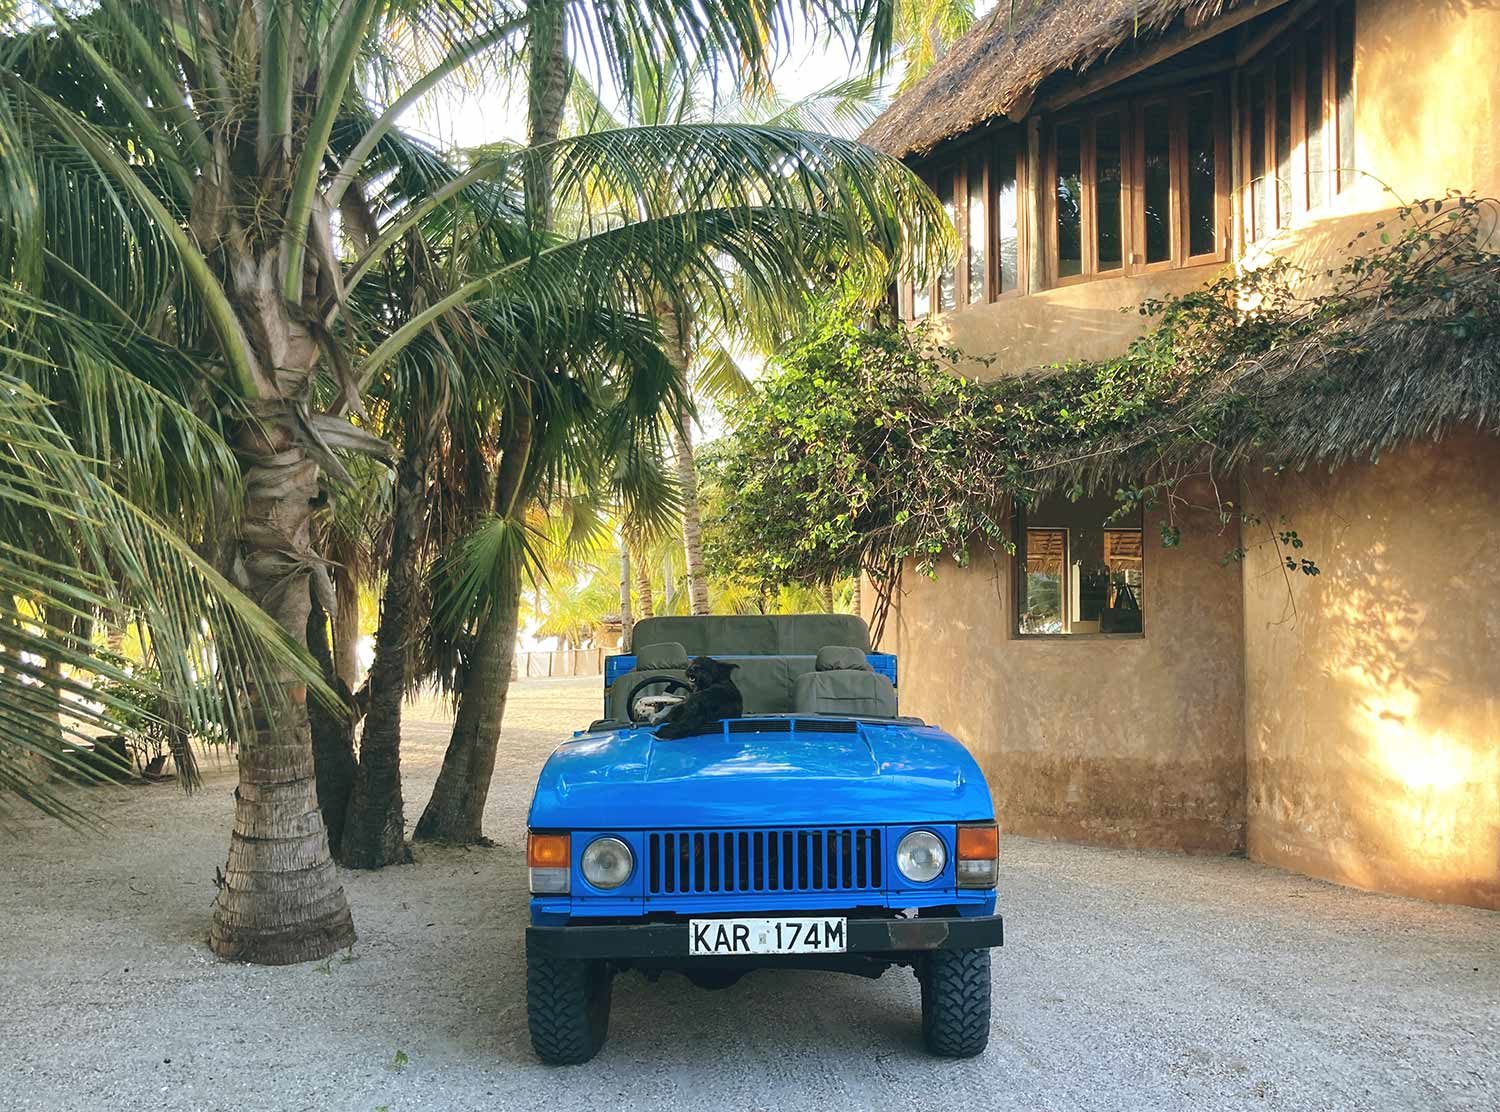 Manda Bay Resort Go for a sunset ride and drinks in the cool blue jeep and explore the old ruins along the way